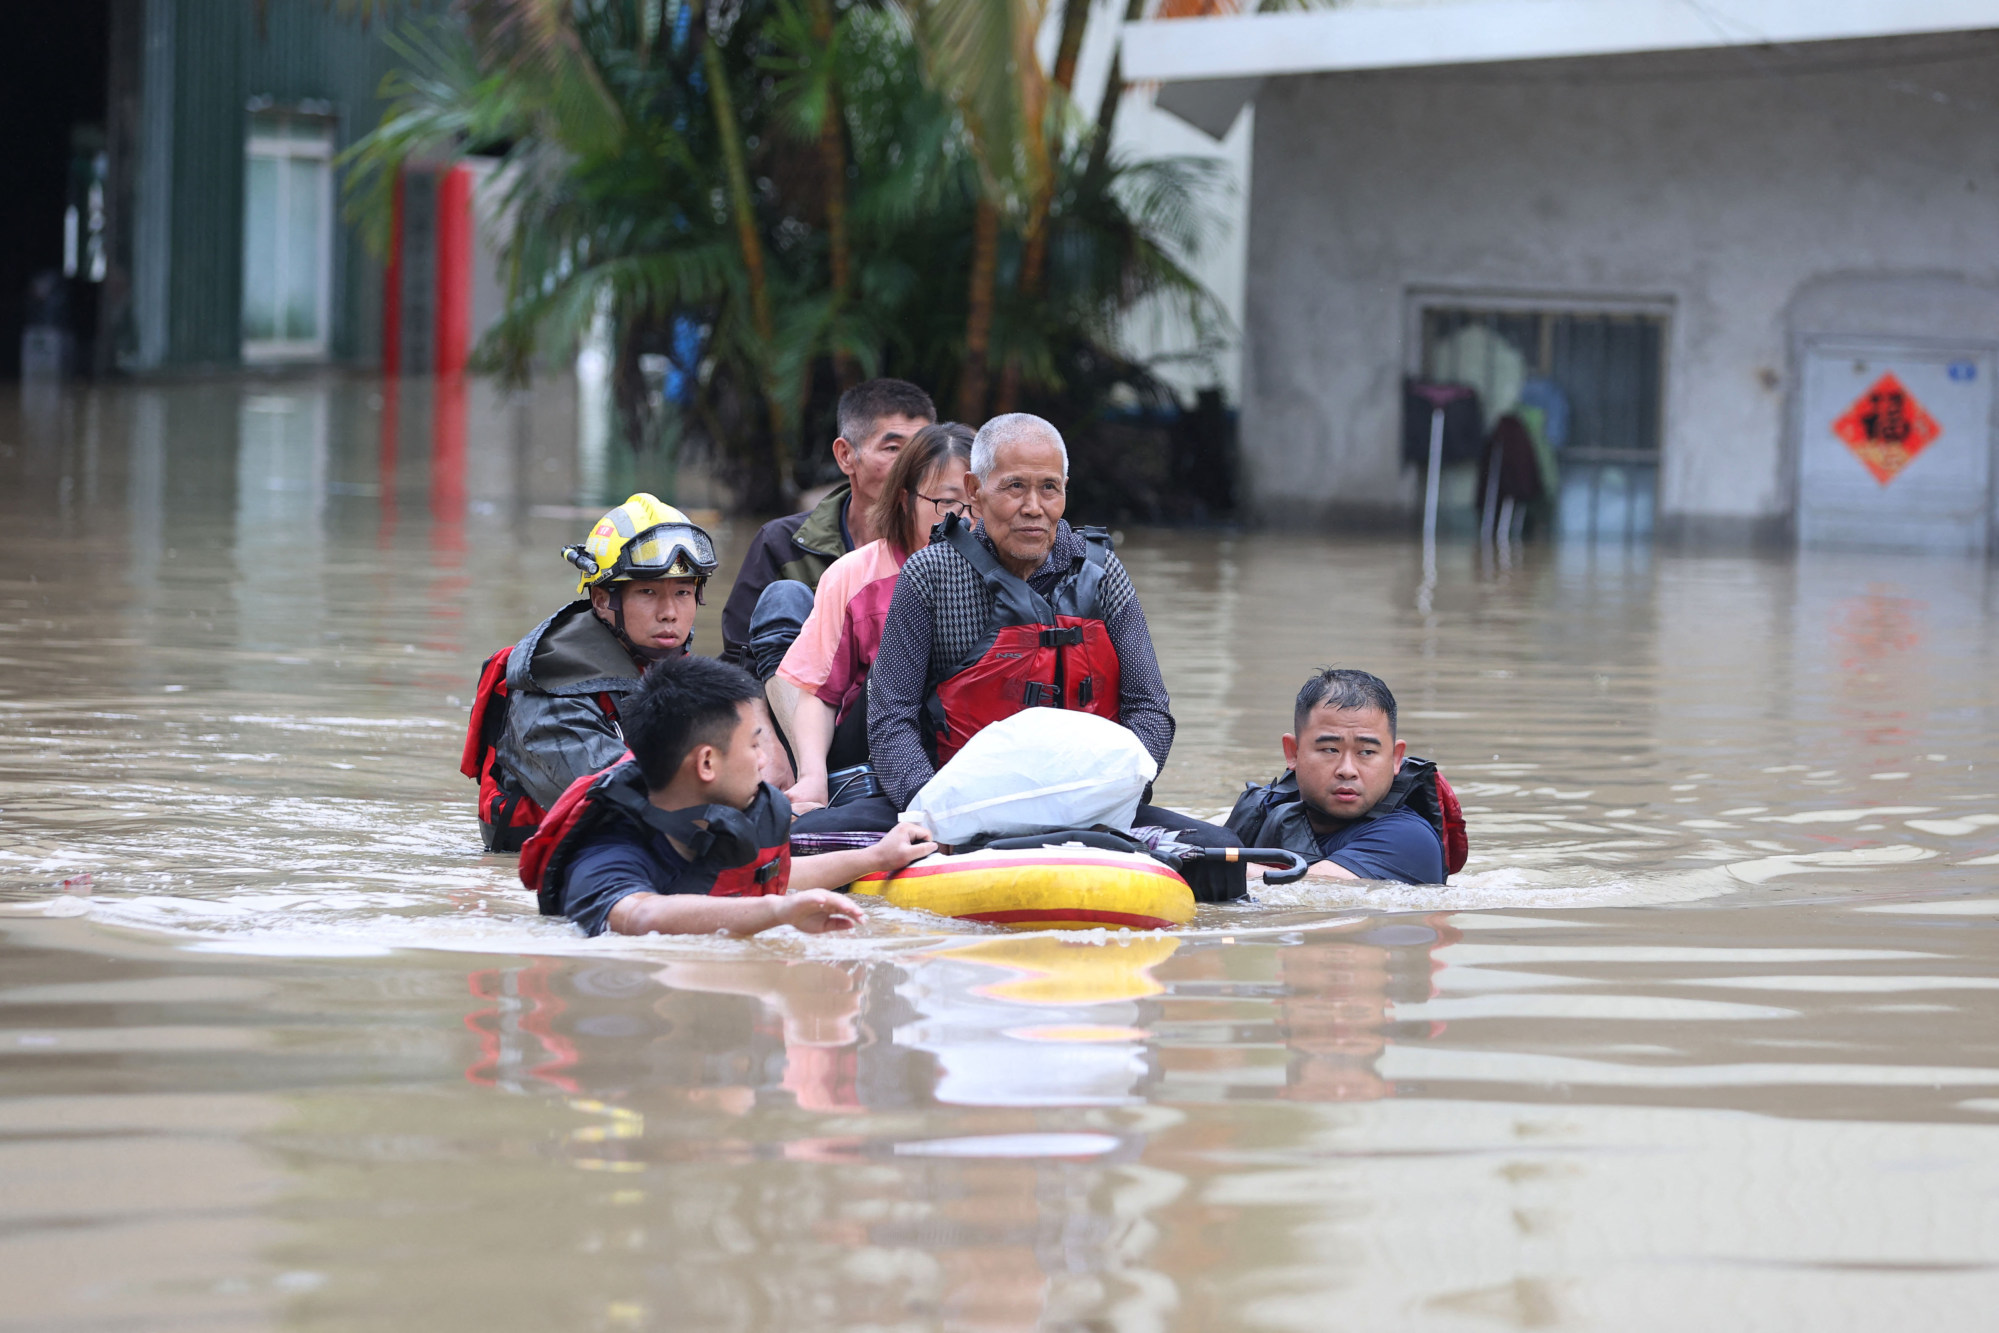 Rescuers evacuating residents in a flooded area after heavy rains in eastern China’s Fujian province. Photo: AFP